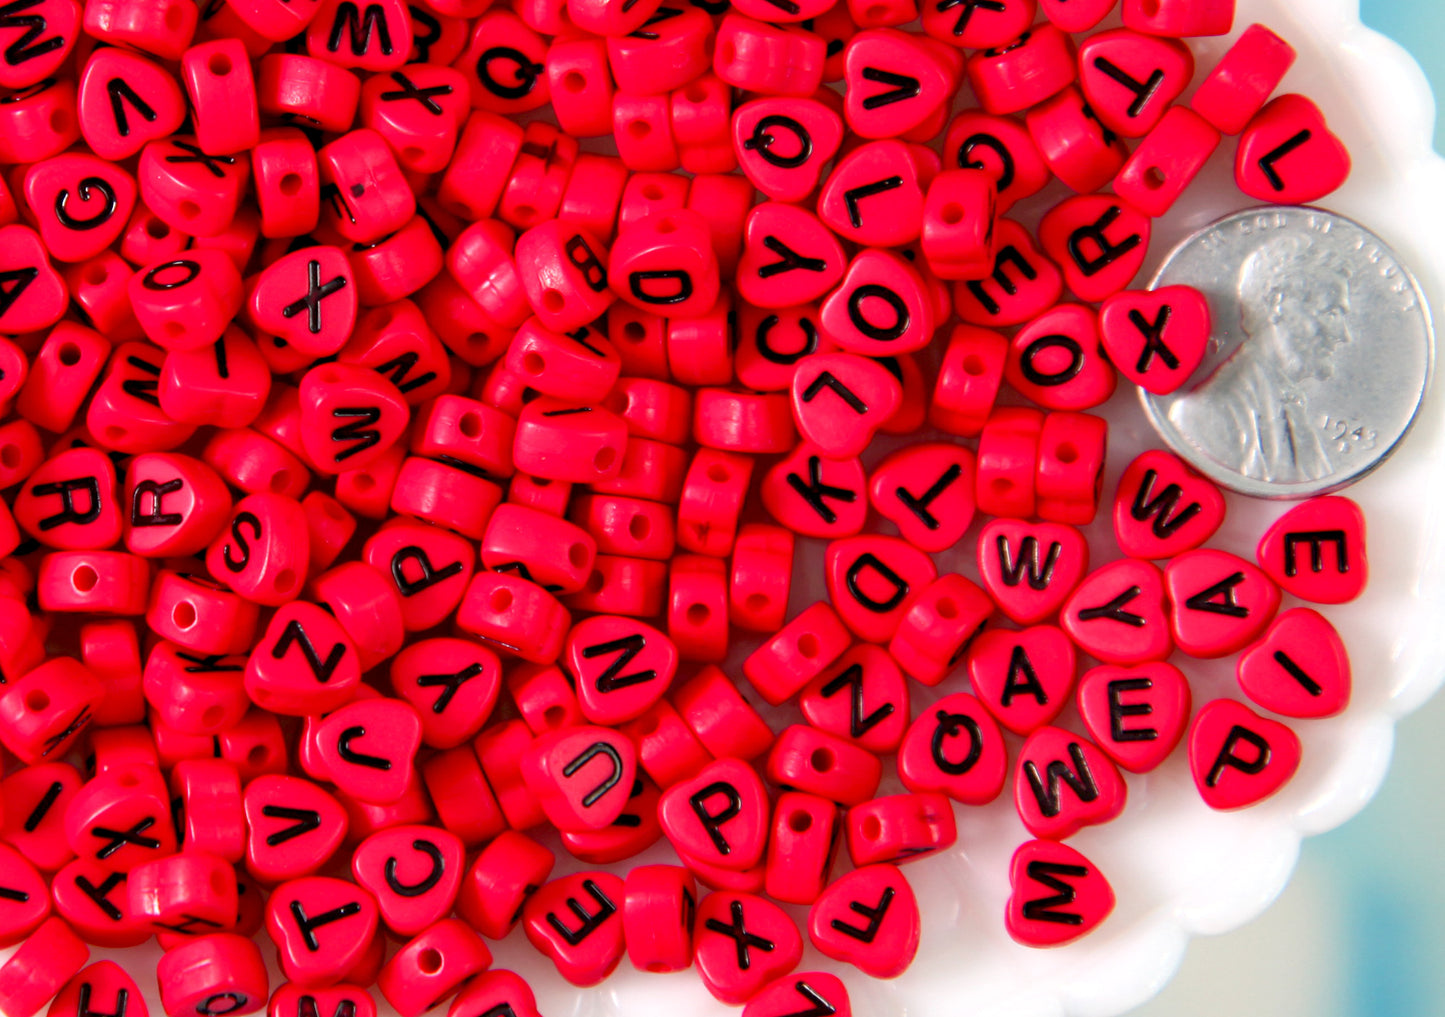 Letter Beads - 7mm Little Red Heart Shaped Alphabet Acrylic or Resin Beads - 300 pc set